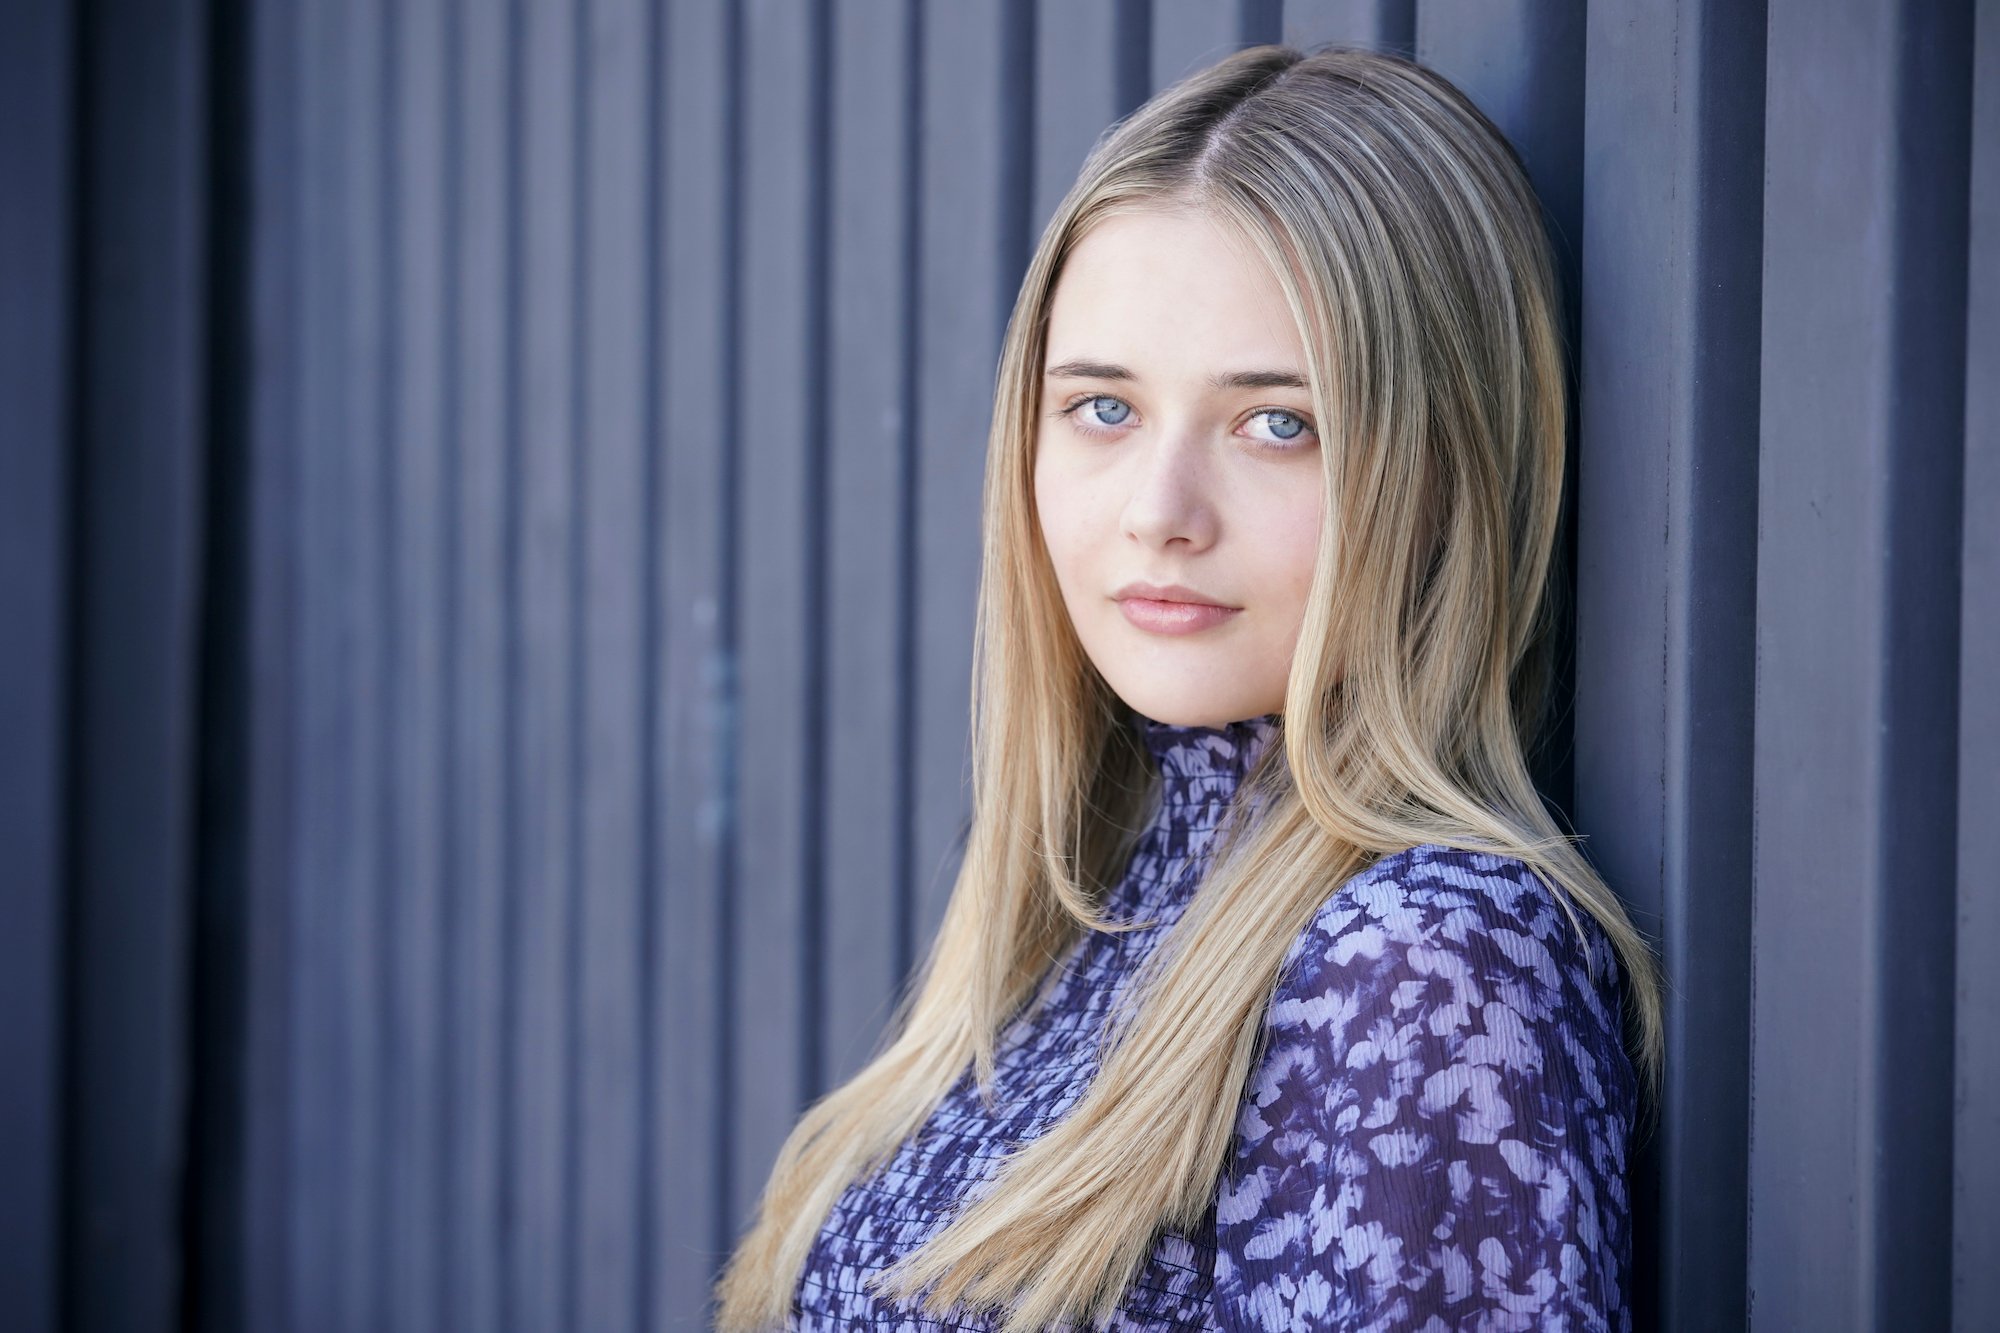 ‘The Young and the Restless’: Who Is the New Faith Newman, Reylynn Caster?